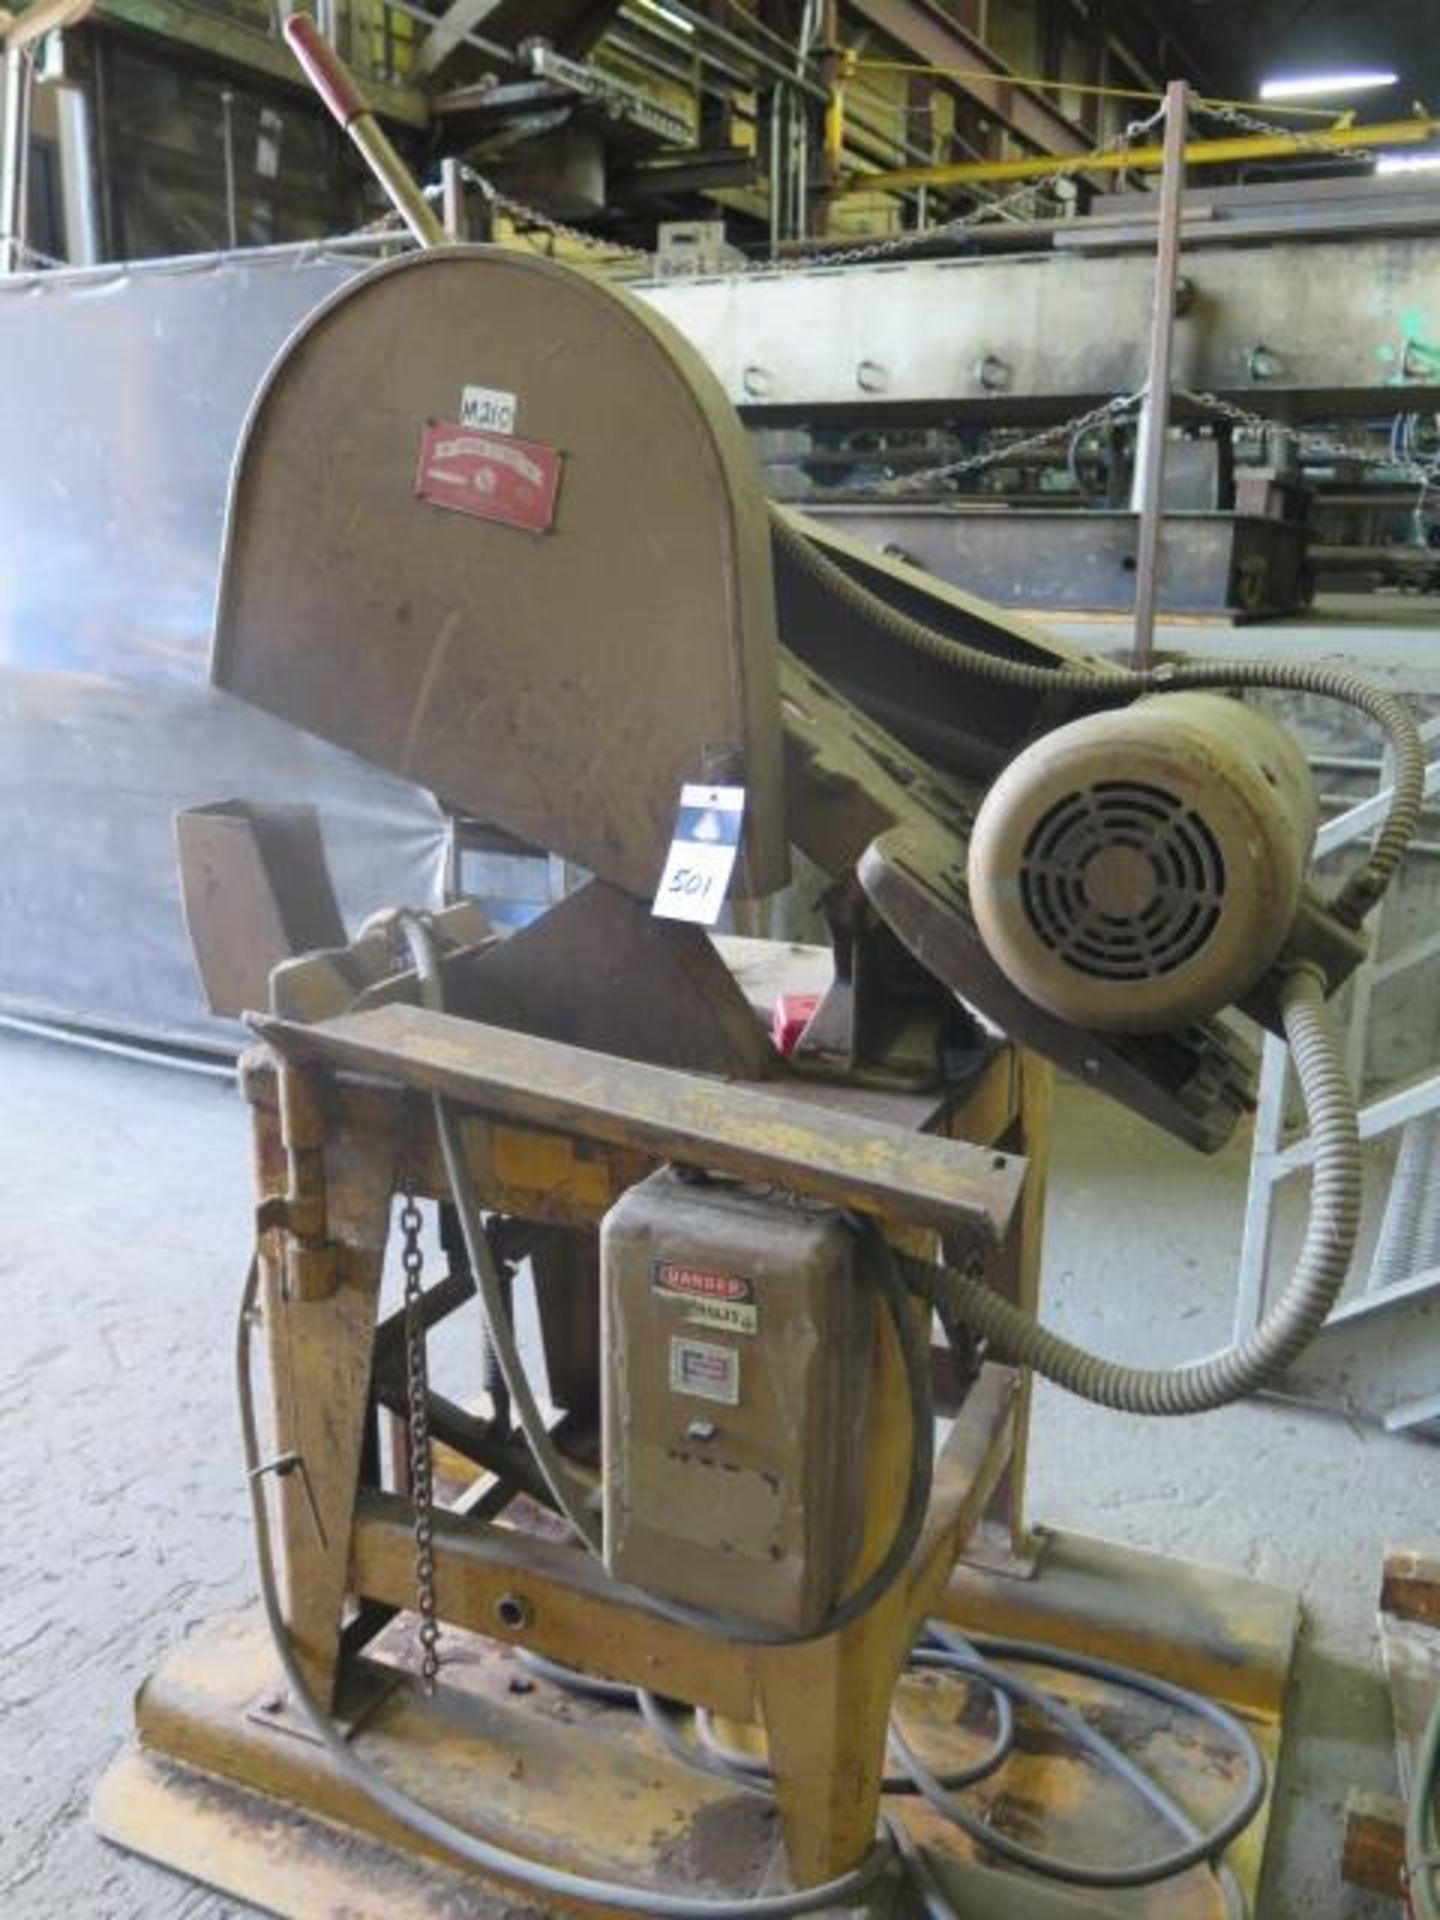 Toledo-Beaver No. 20 "Speed Cut" 20" Abrasive Cutoff Saw (SOLD AS-IS - NO WARRANTY) - Image 2 of 5